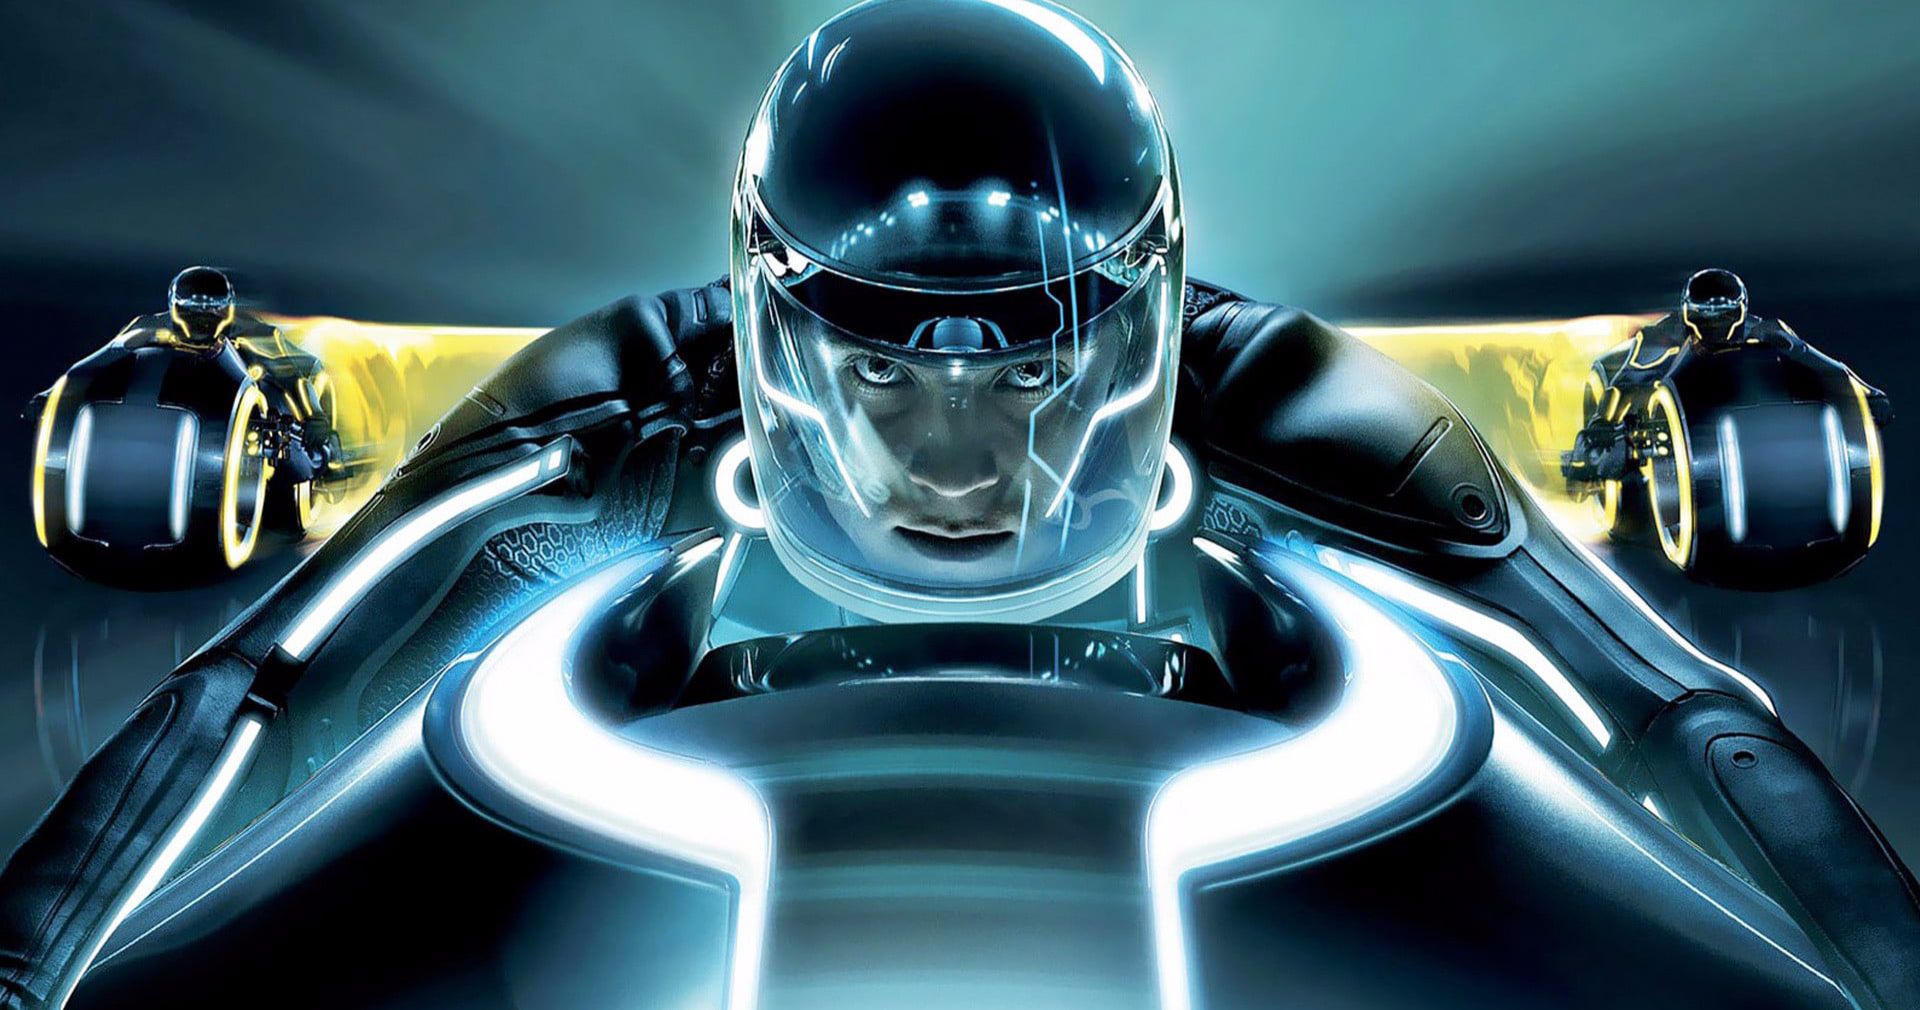 Tron 3 Could Still Happen Says Tron: Legacy Director